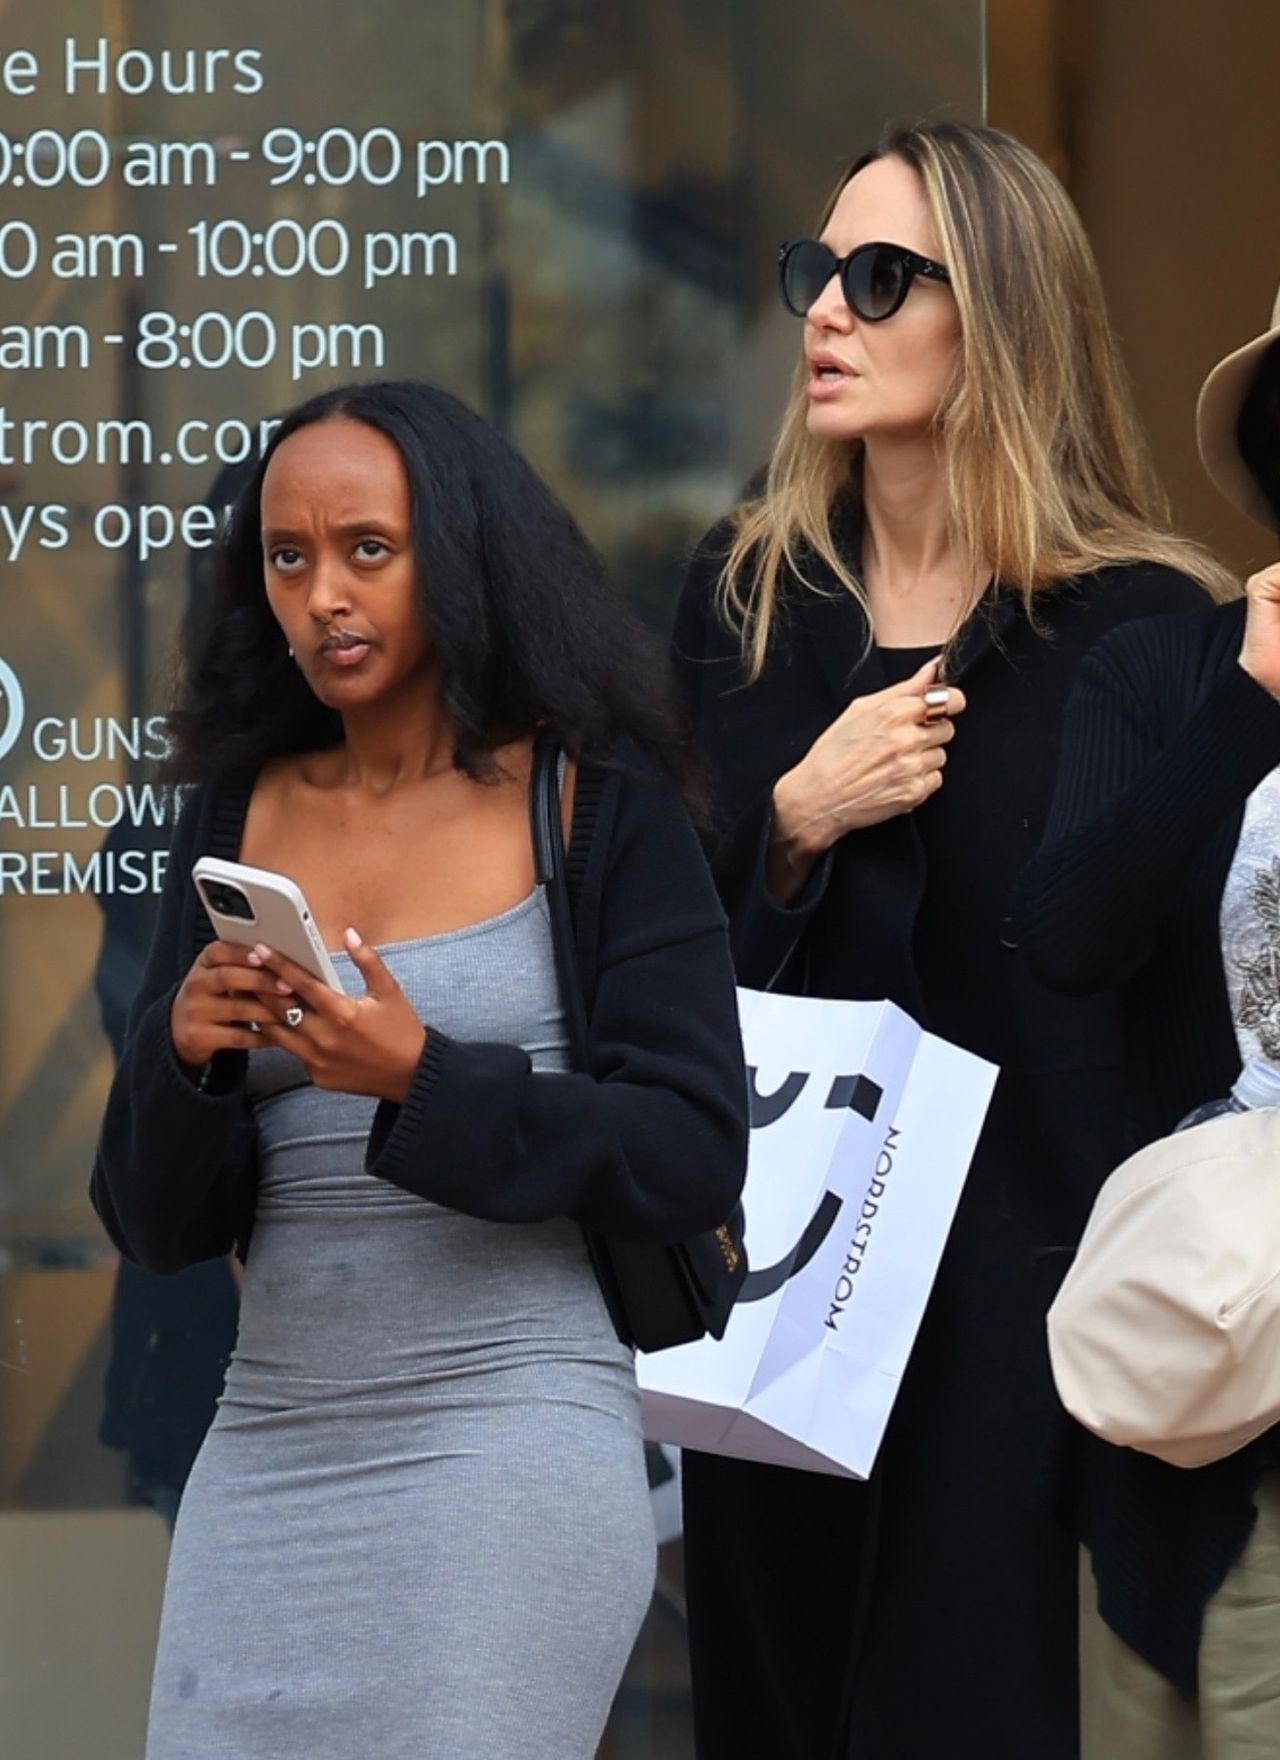 Angelina Jolie "caught" in the city with her daughter